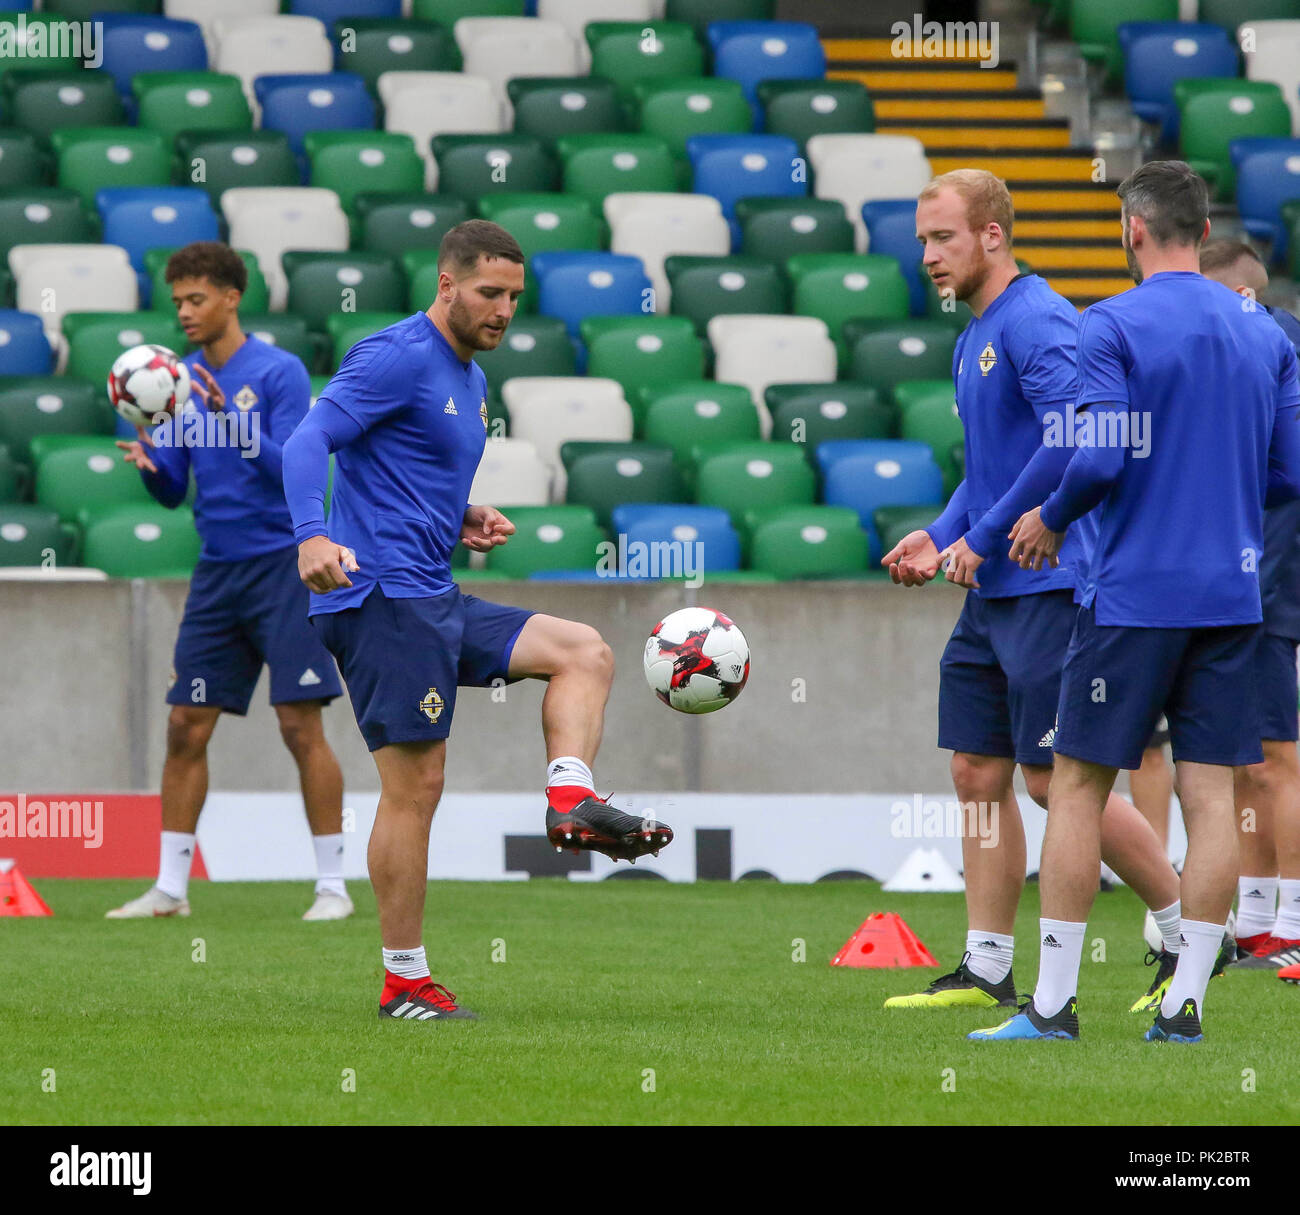 Windsor Park, Belfast, Northern Ireland. 10 September 2018. After Saturday's defeat in the UEFA Nations League, Northern Ireland returned to training this morning at Windsor Park. Tomorrow night they play Israel in a friendly international. Conor Washington on the ball. Credit: David Hunter/Alamy Live News. Stock Photo